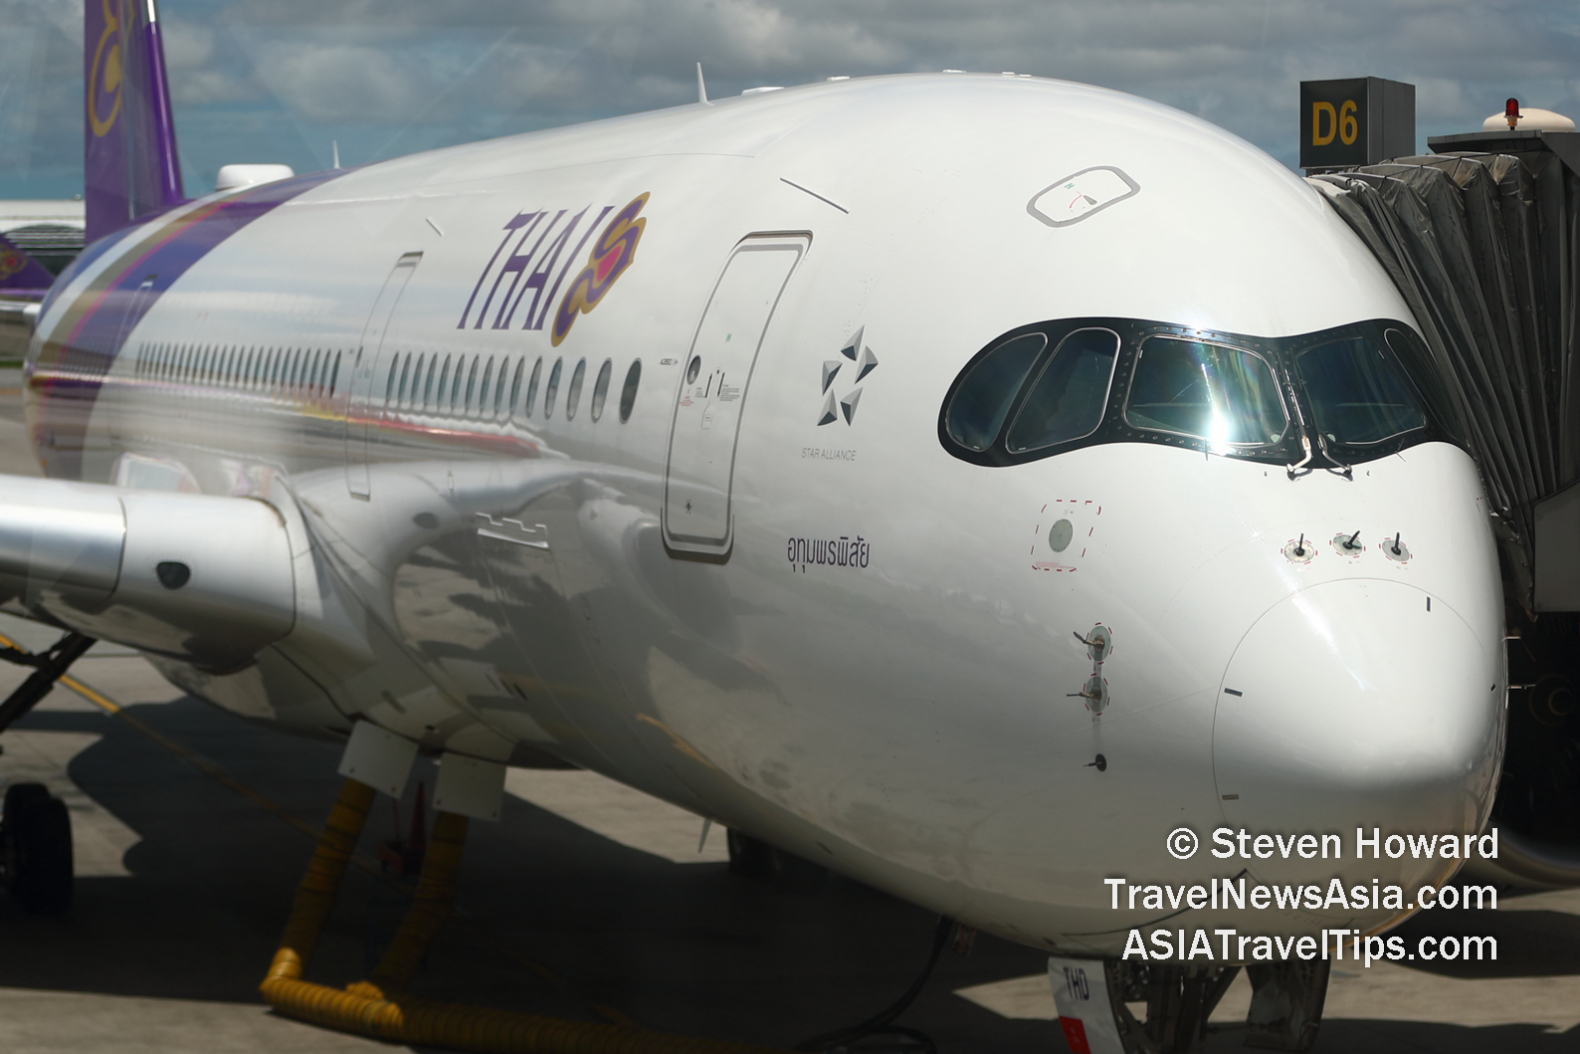 Thai Airways A350-900 at BKK. Picture by Steven Howard of TravelNewsAsia.com Click to enlarge.